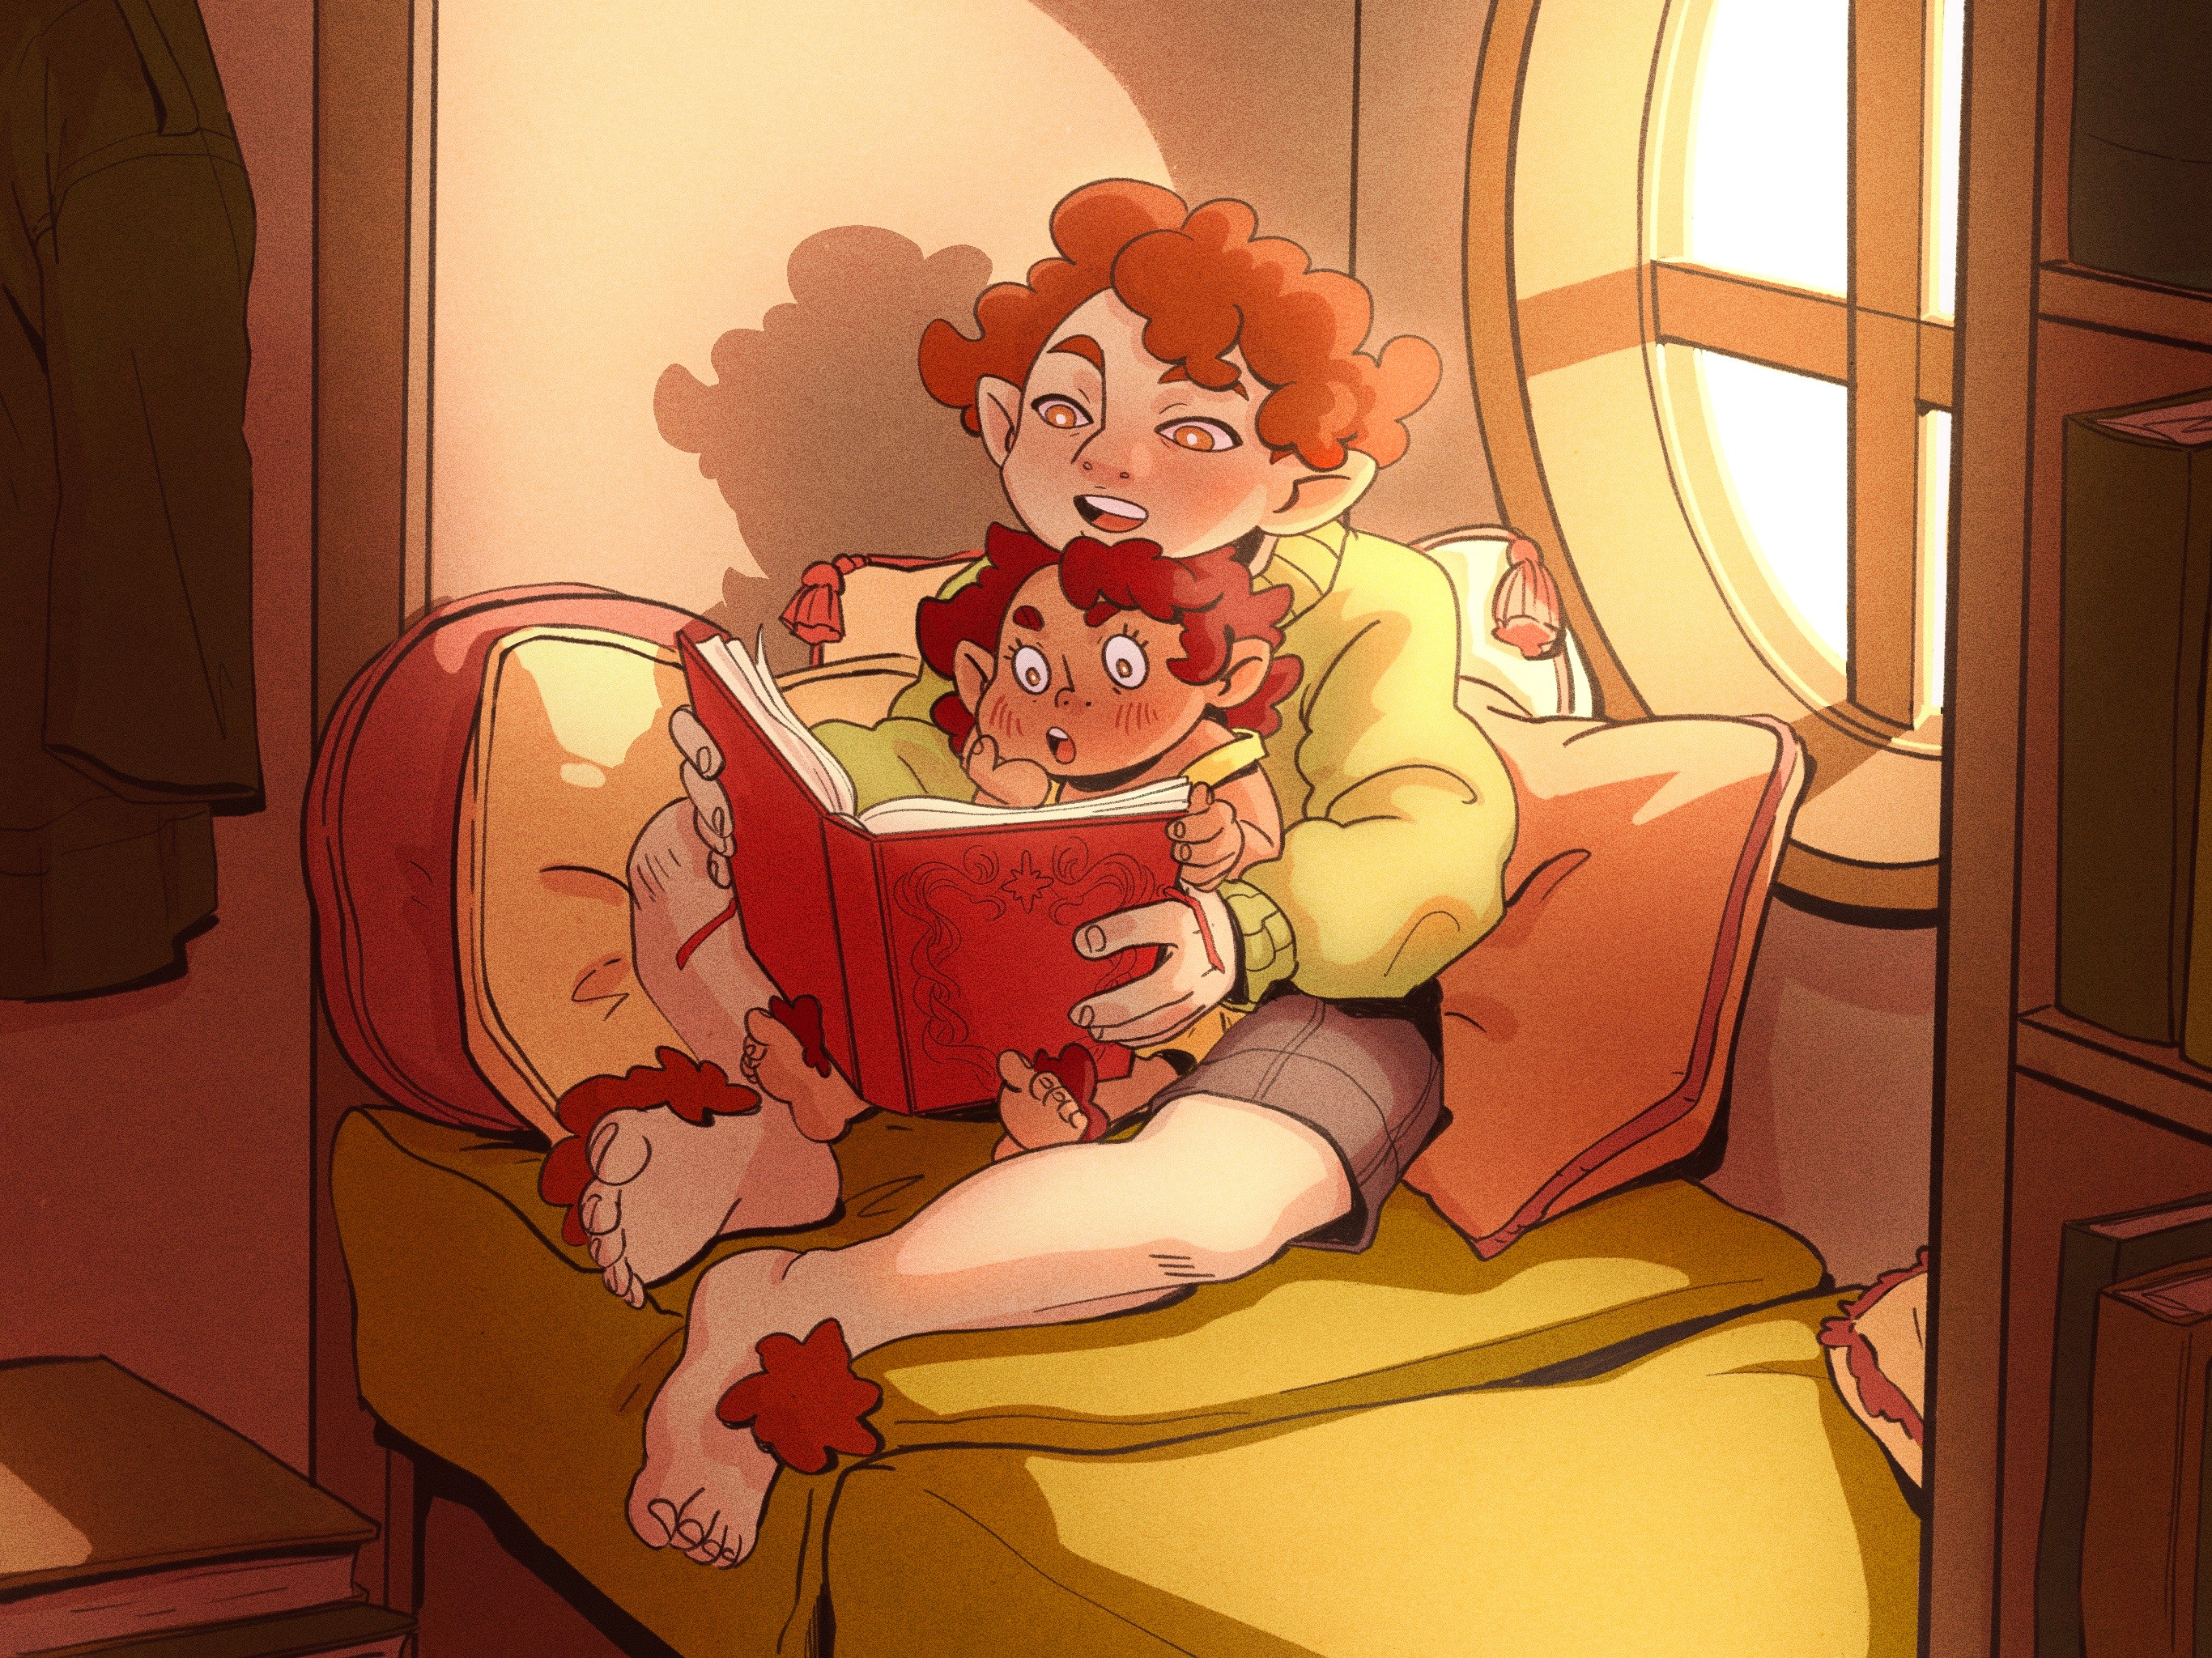 Magnolia is a very curious hobbit and she loves hearing stories about distant lands and cultures. Florian simply loves books, so he doesn't mind reading adventure books for his baby sister.